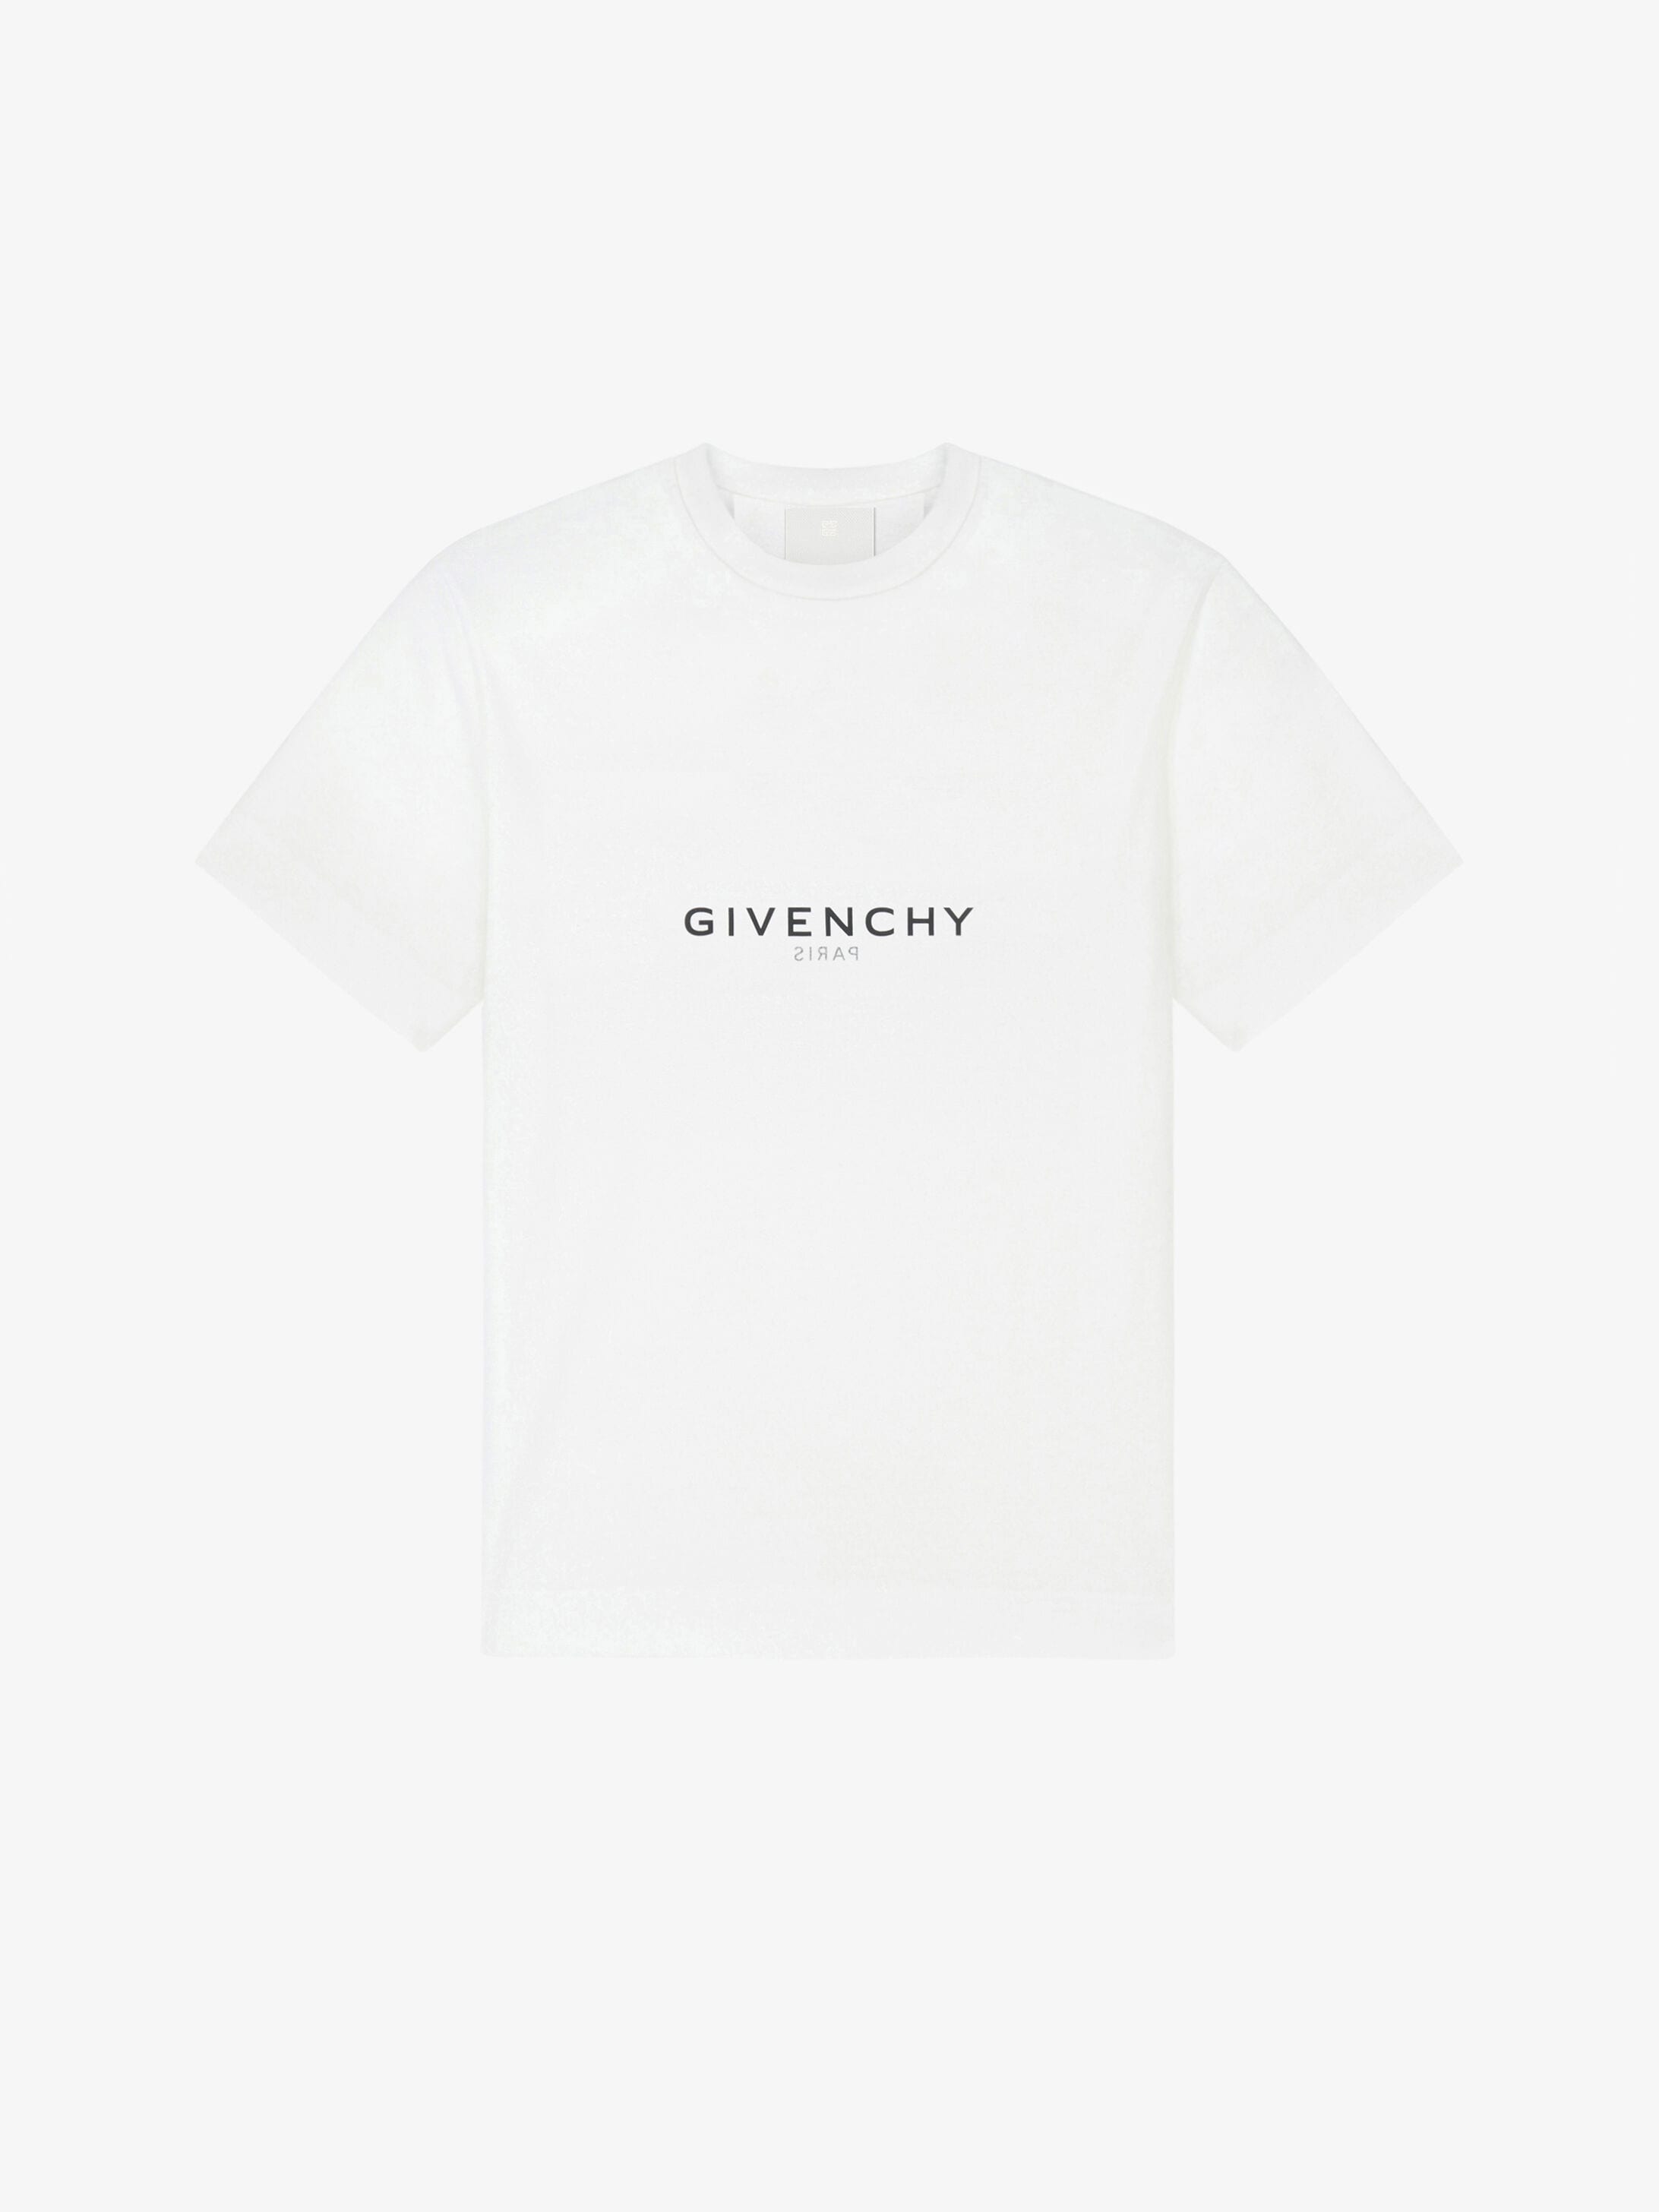 givenchy top